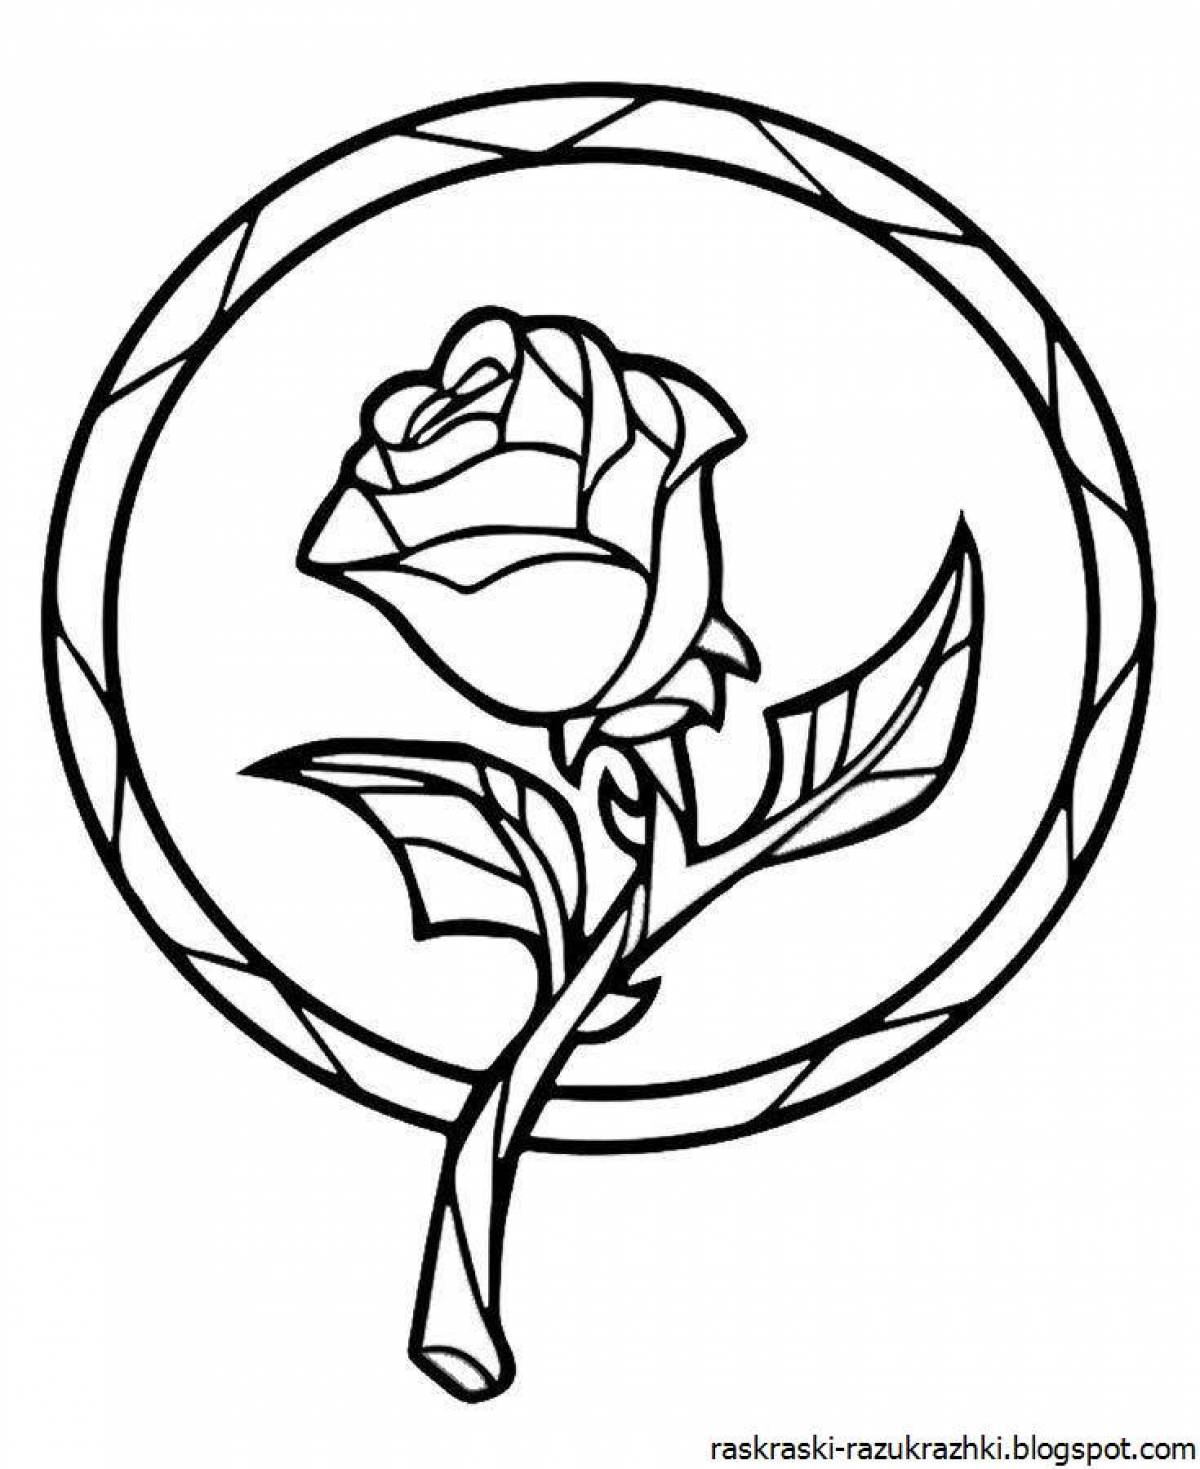 Exquisite rose coloring book for kids